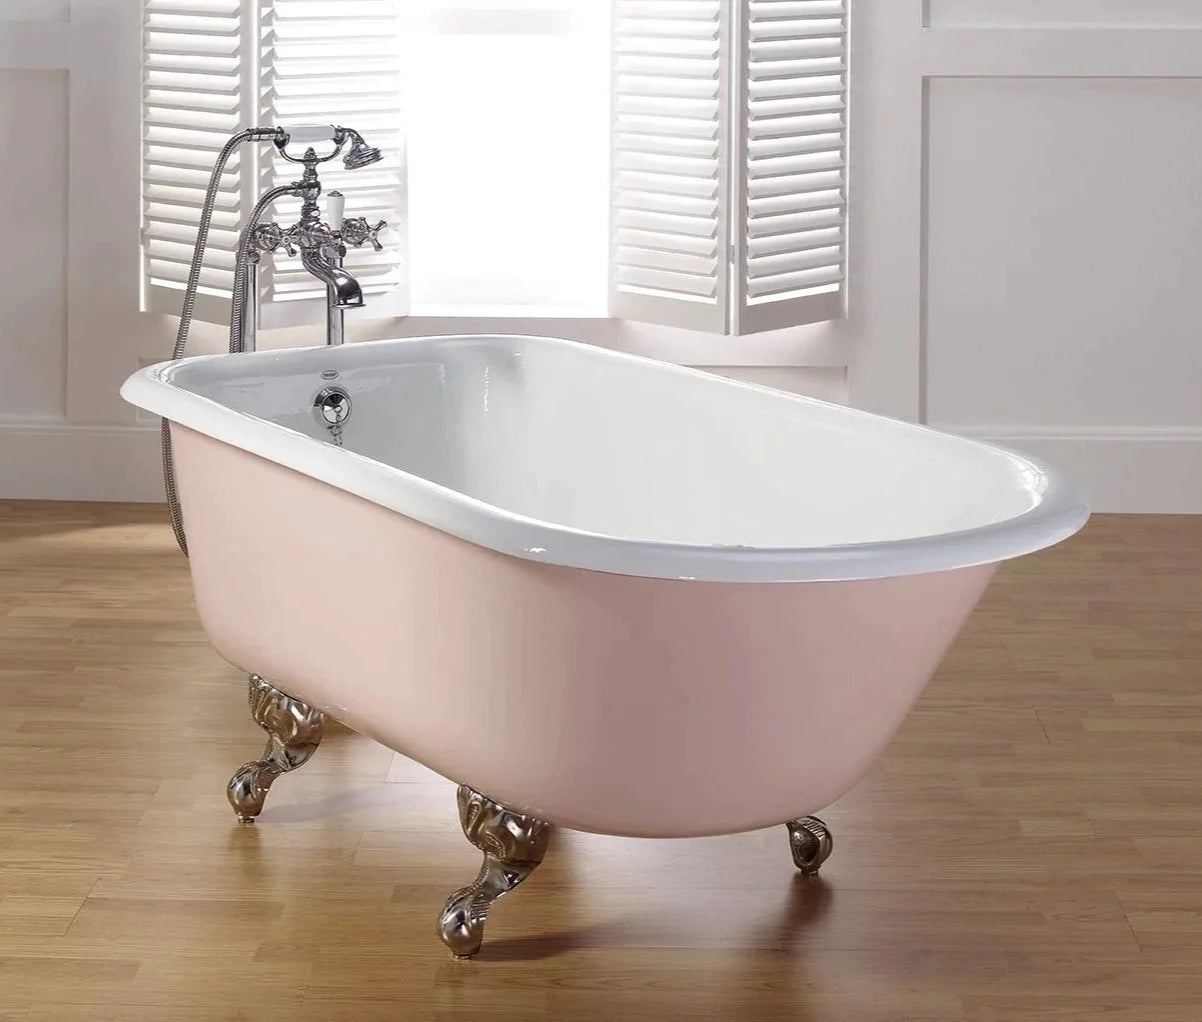 TRADITIONAL Cast Iron Bath With No Faucet Holes